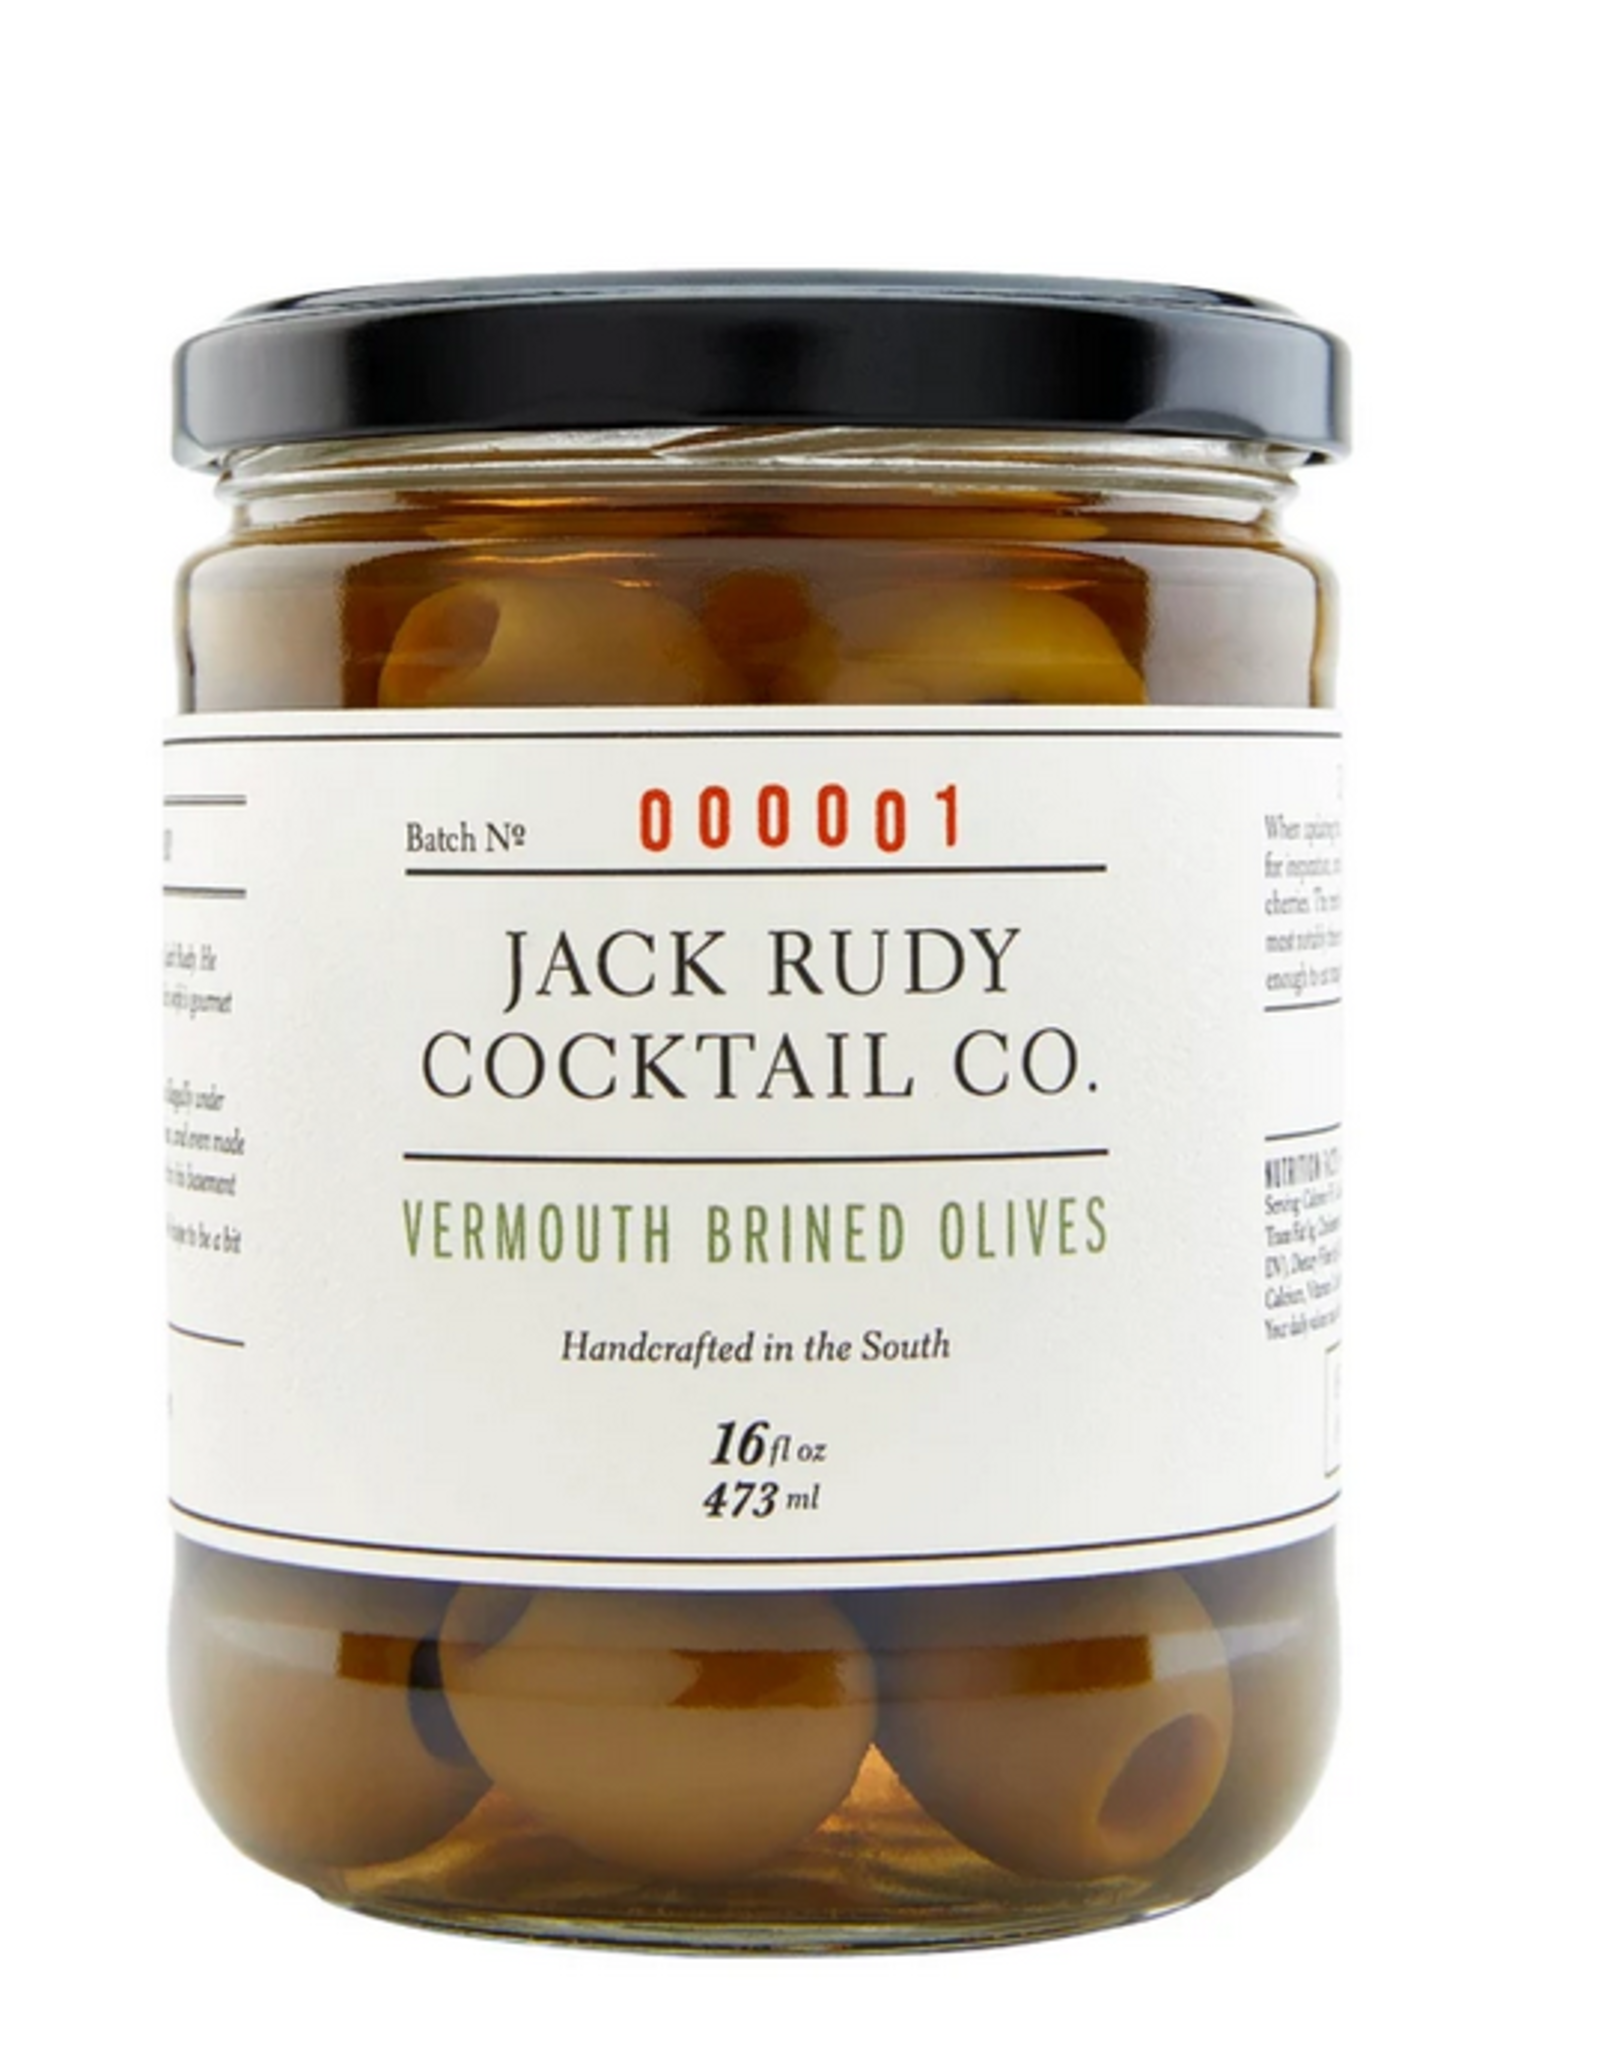 Jack Rudy Vermouth Brined Olives 16 oz.